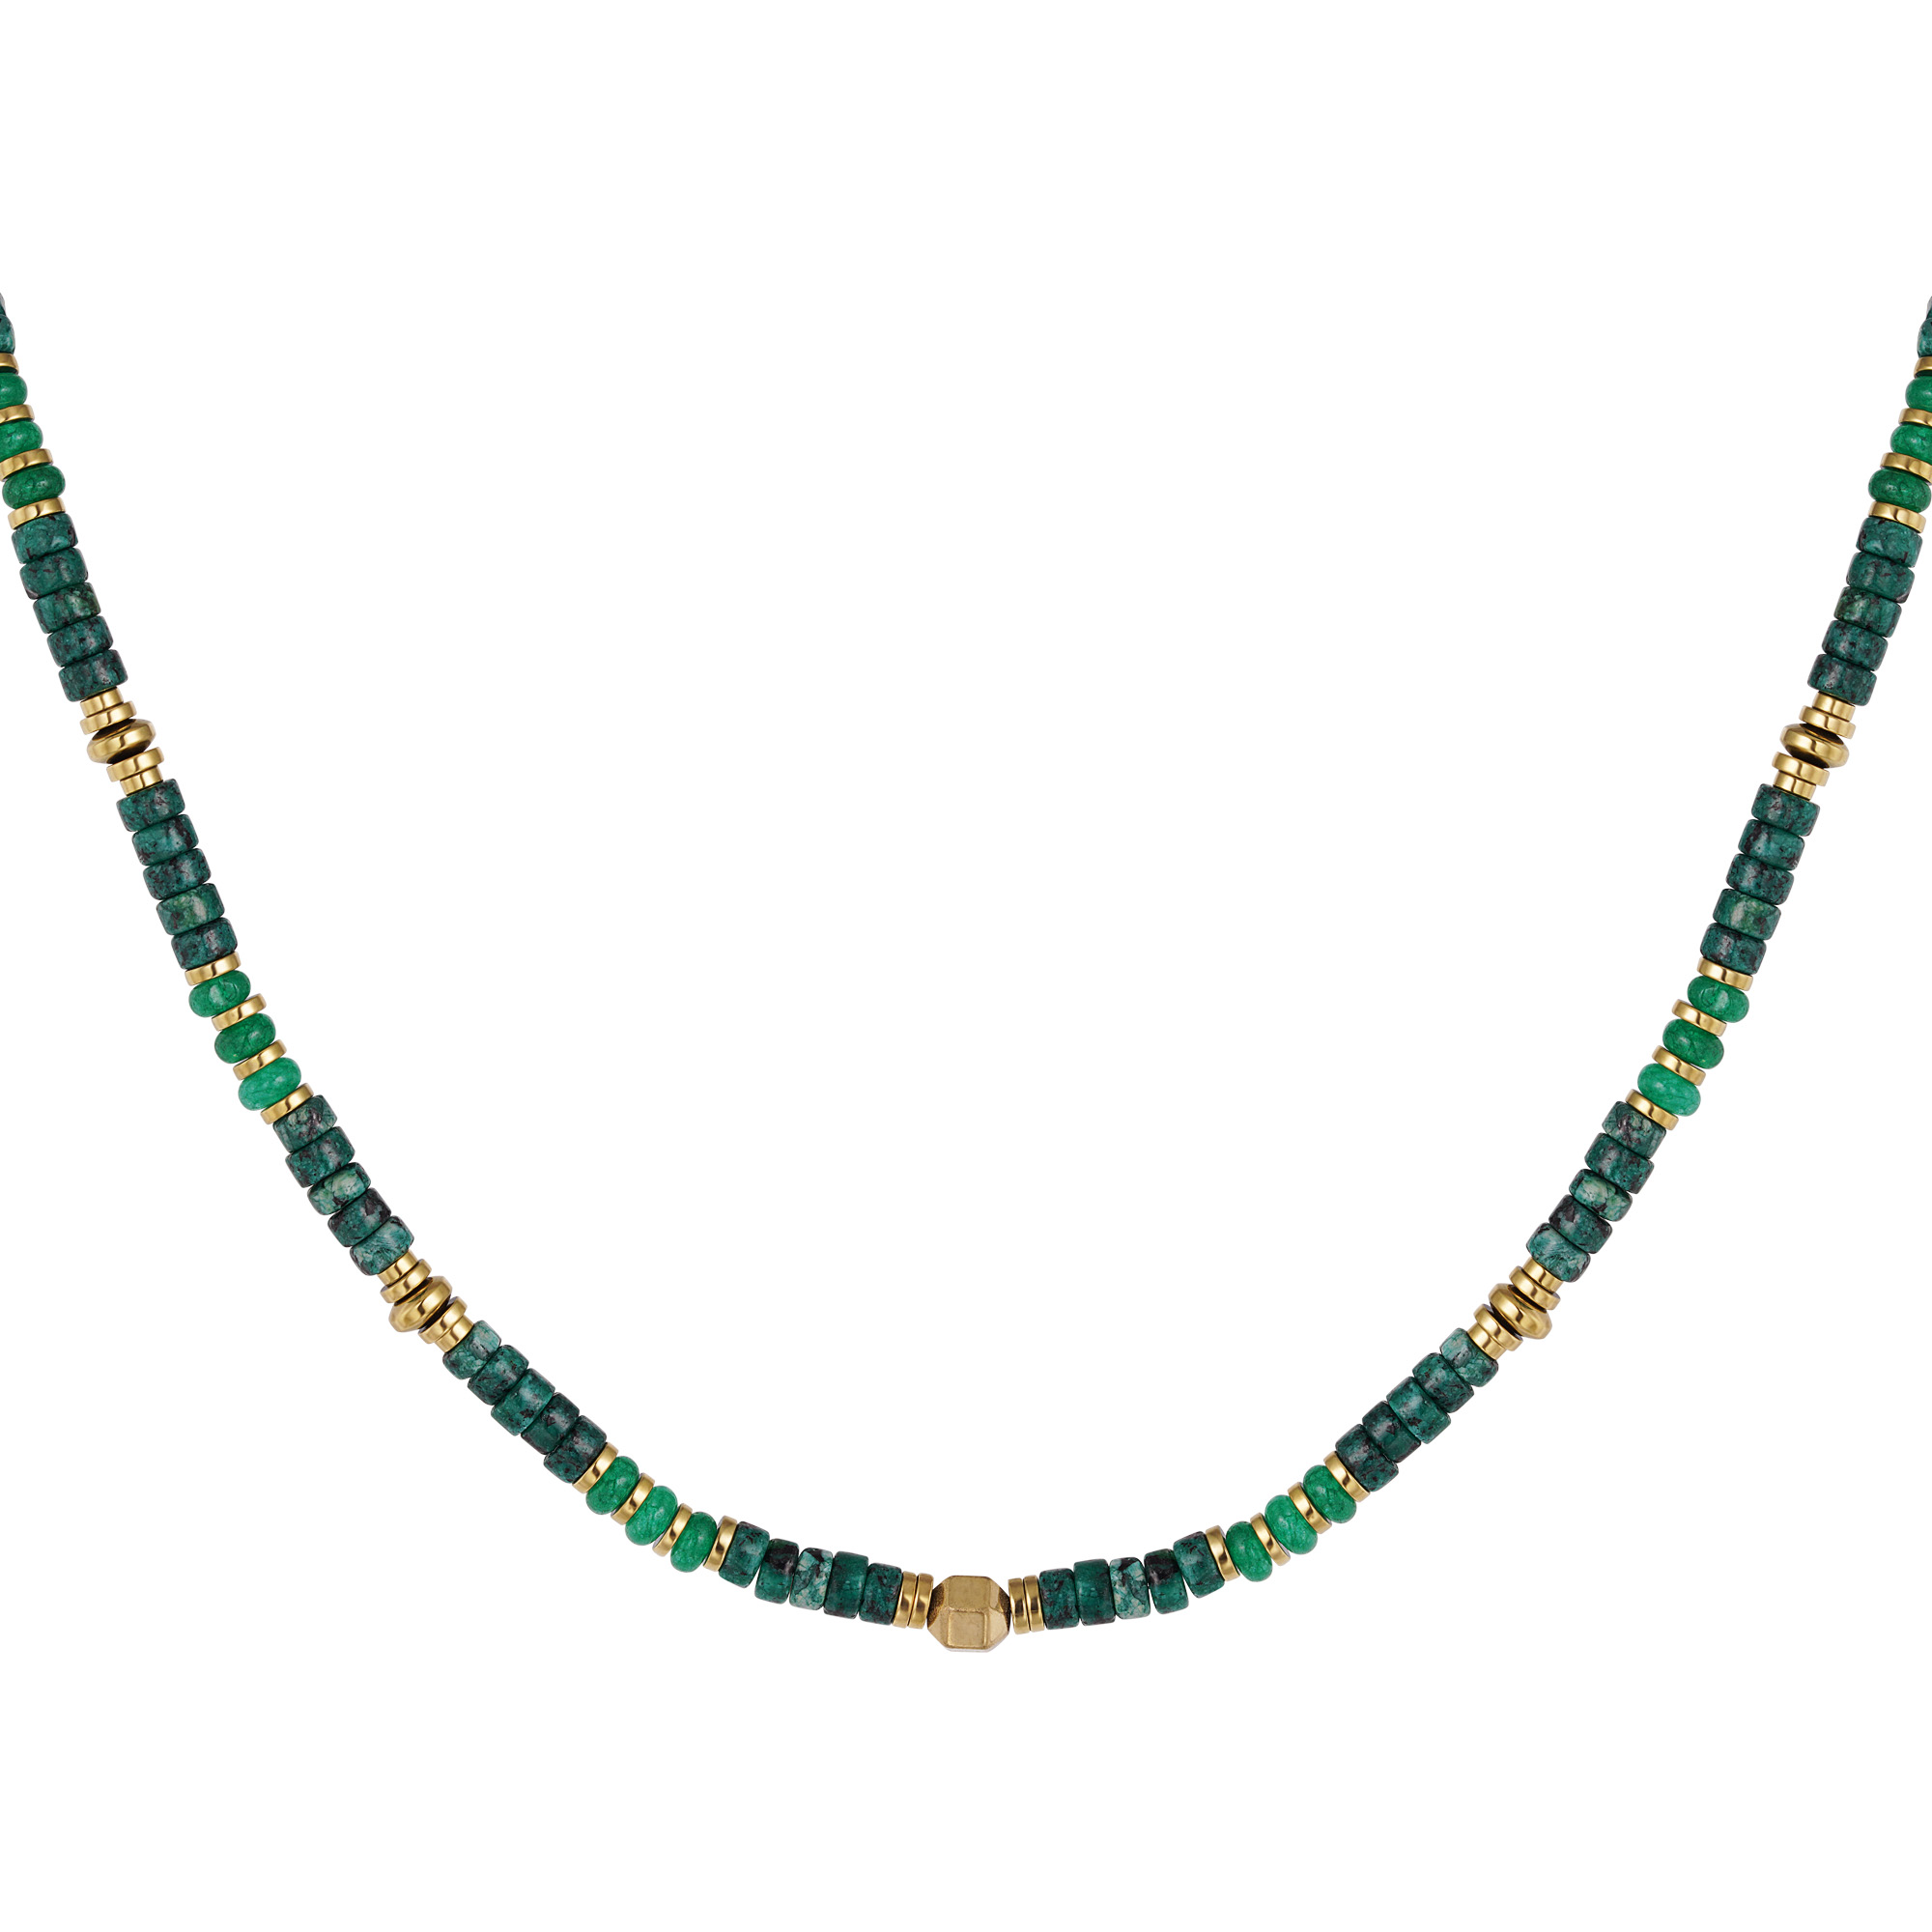 Necklace with small colored stones